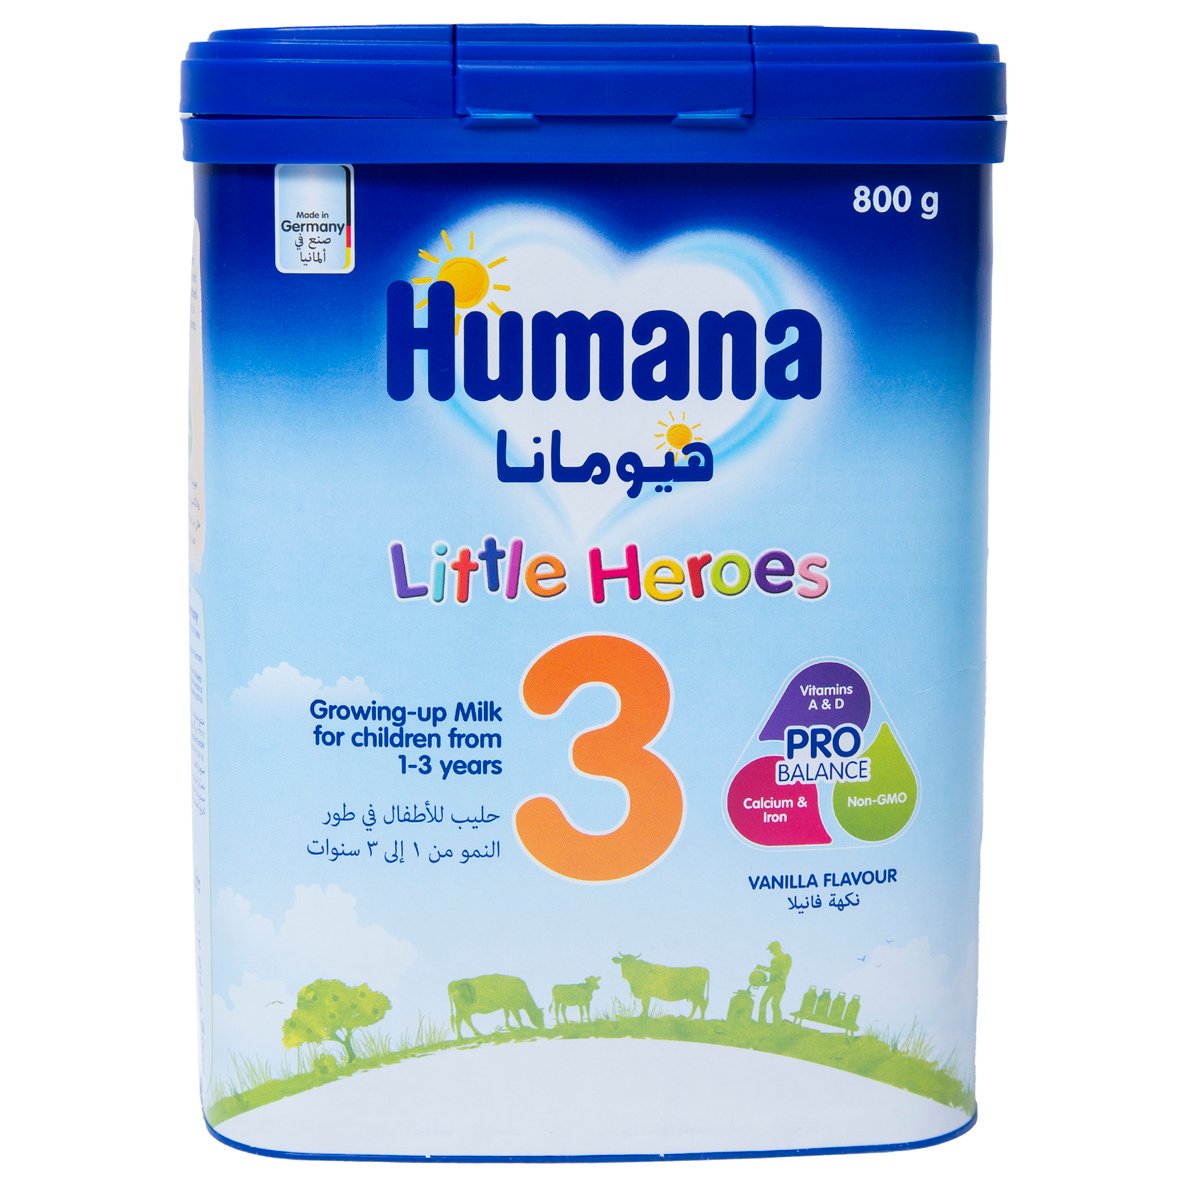 Humana Little Heroes Stage 3 Growing Up Milk From 1-3 Years 800 g